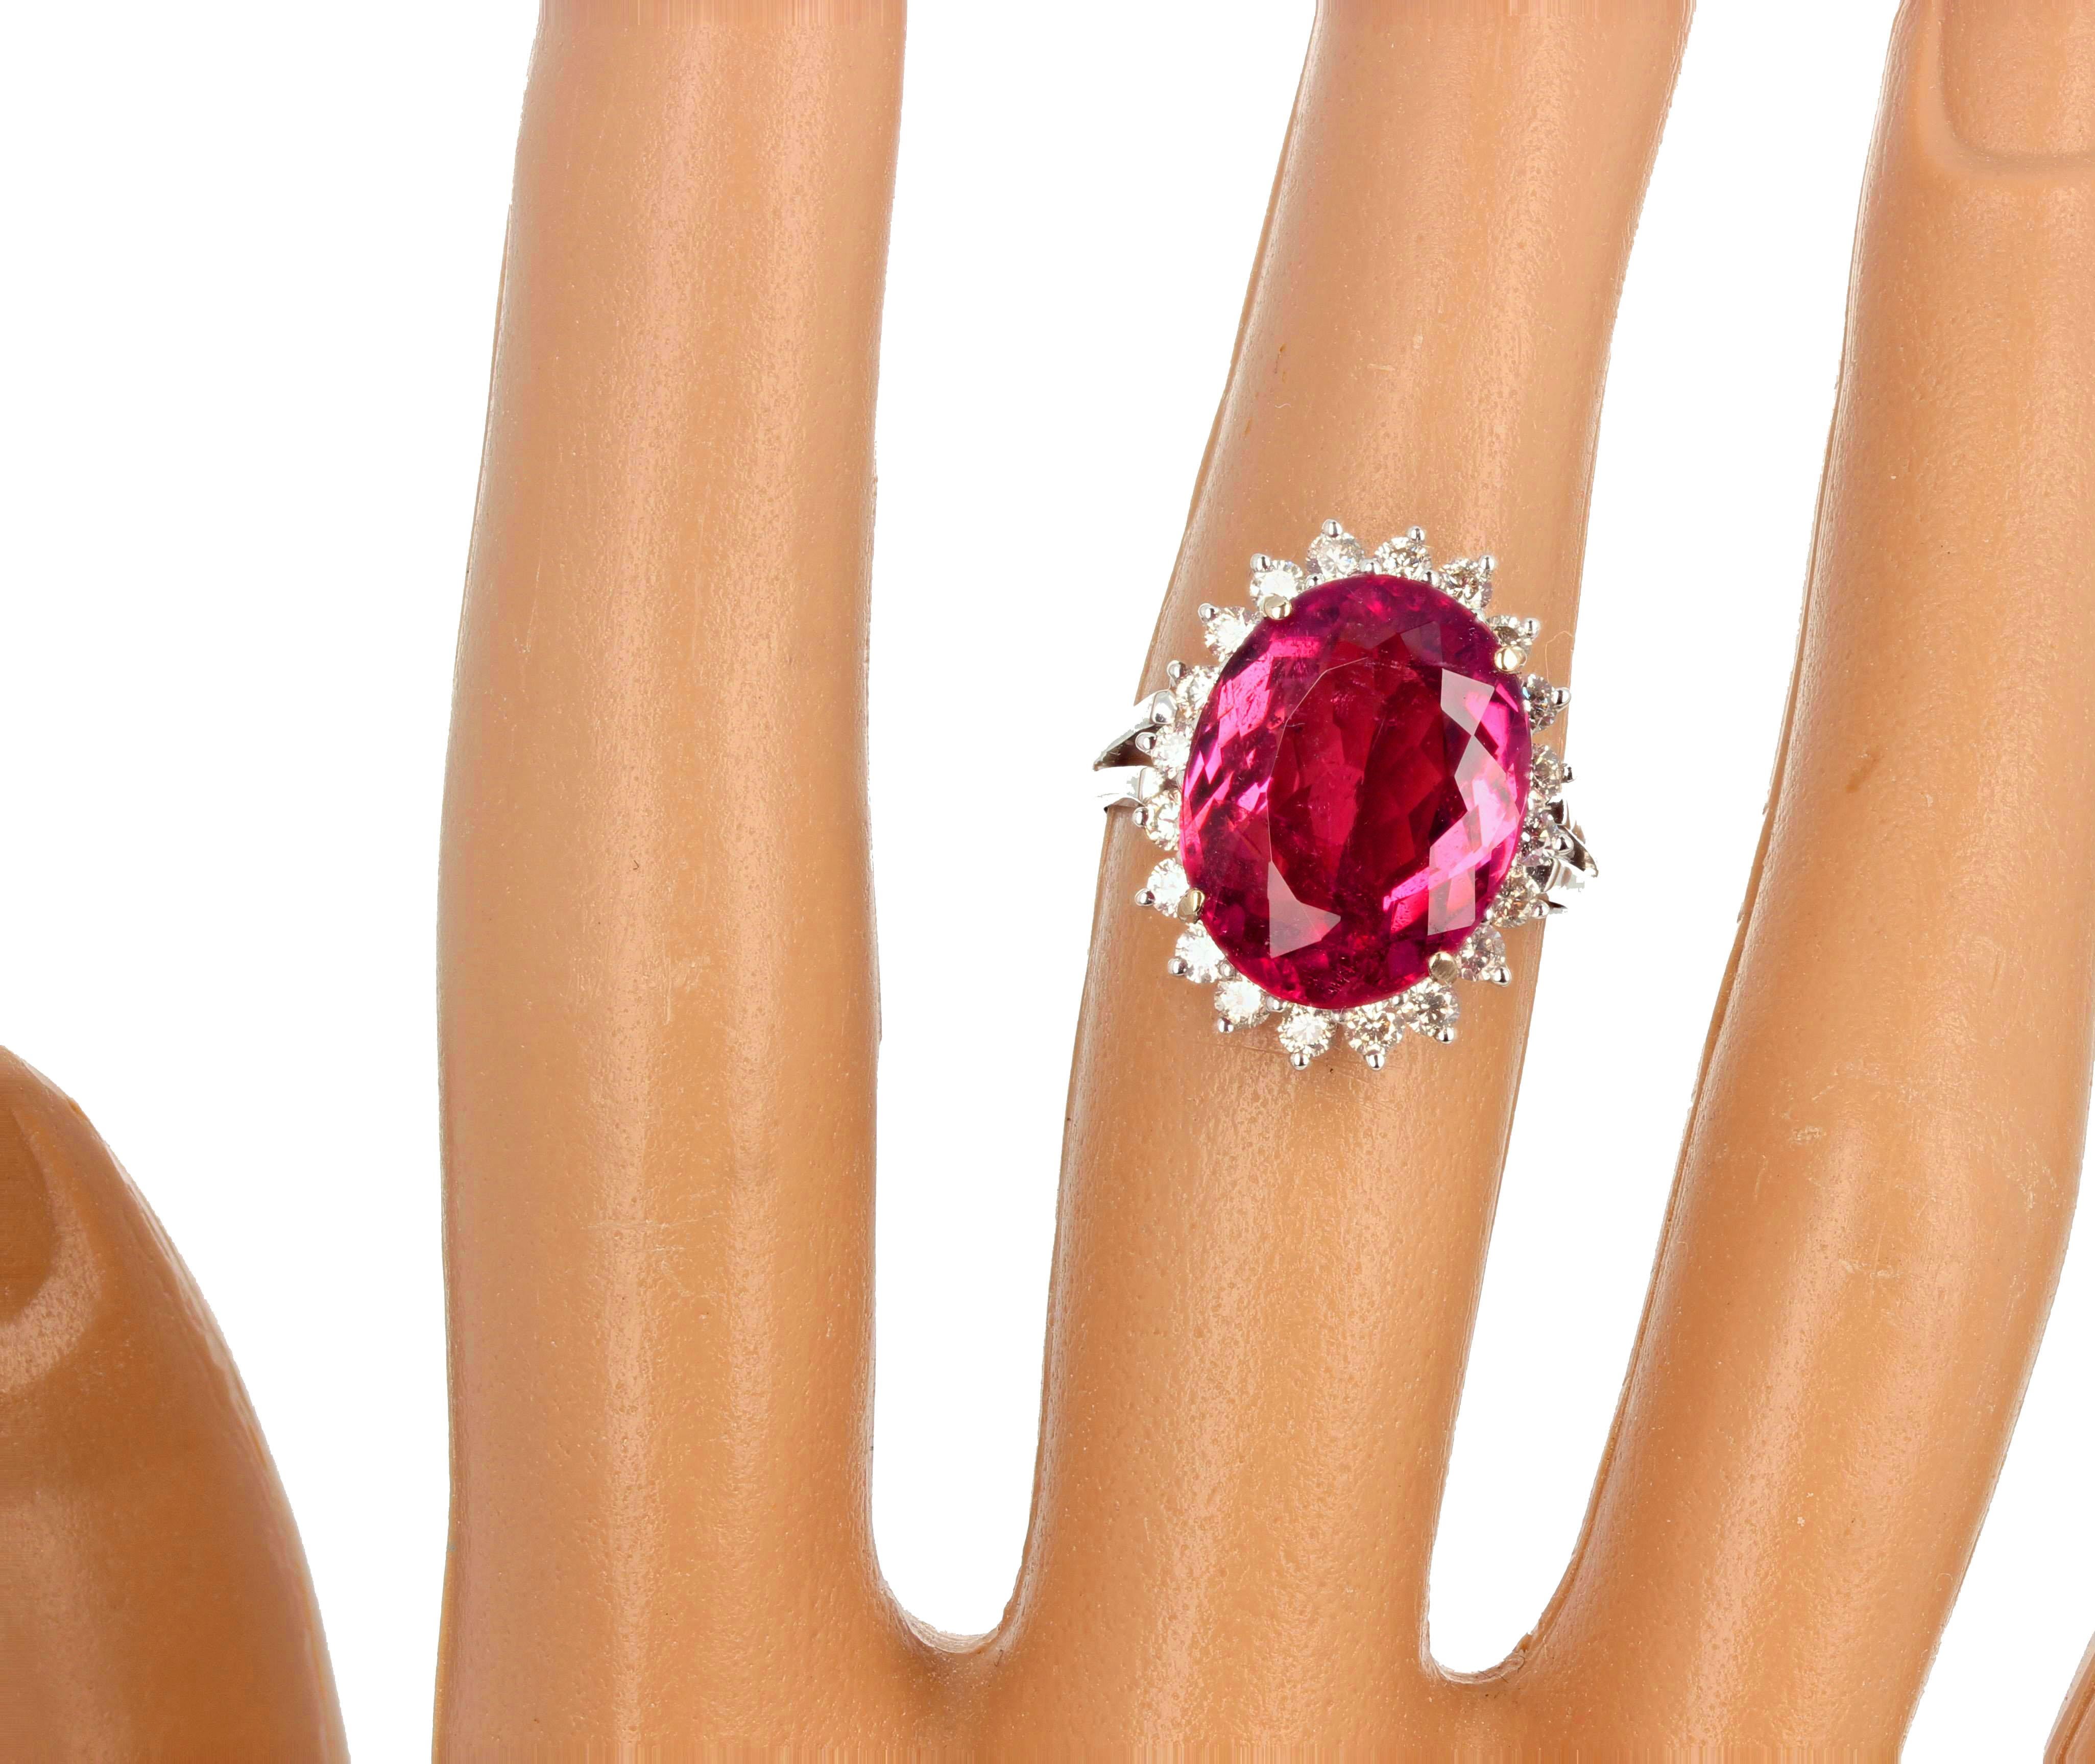 Beautiful red with pinky tone 6.5 carat natural Tourmaline enhanced with 19 glittering little white diamonds set in this 14Kt white gold ring size 7 (sizable).  There are no eye visible inclusions in this gorgeous pinkyred Tourmaline.  This